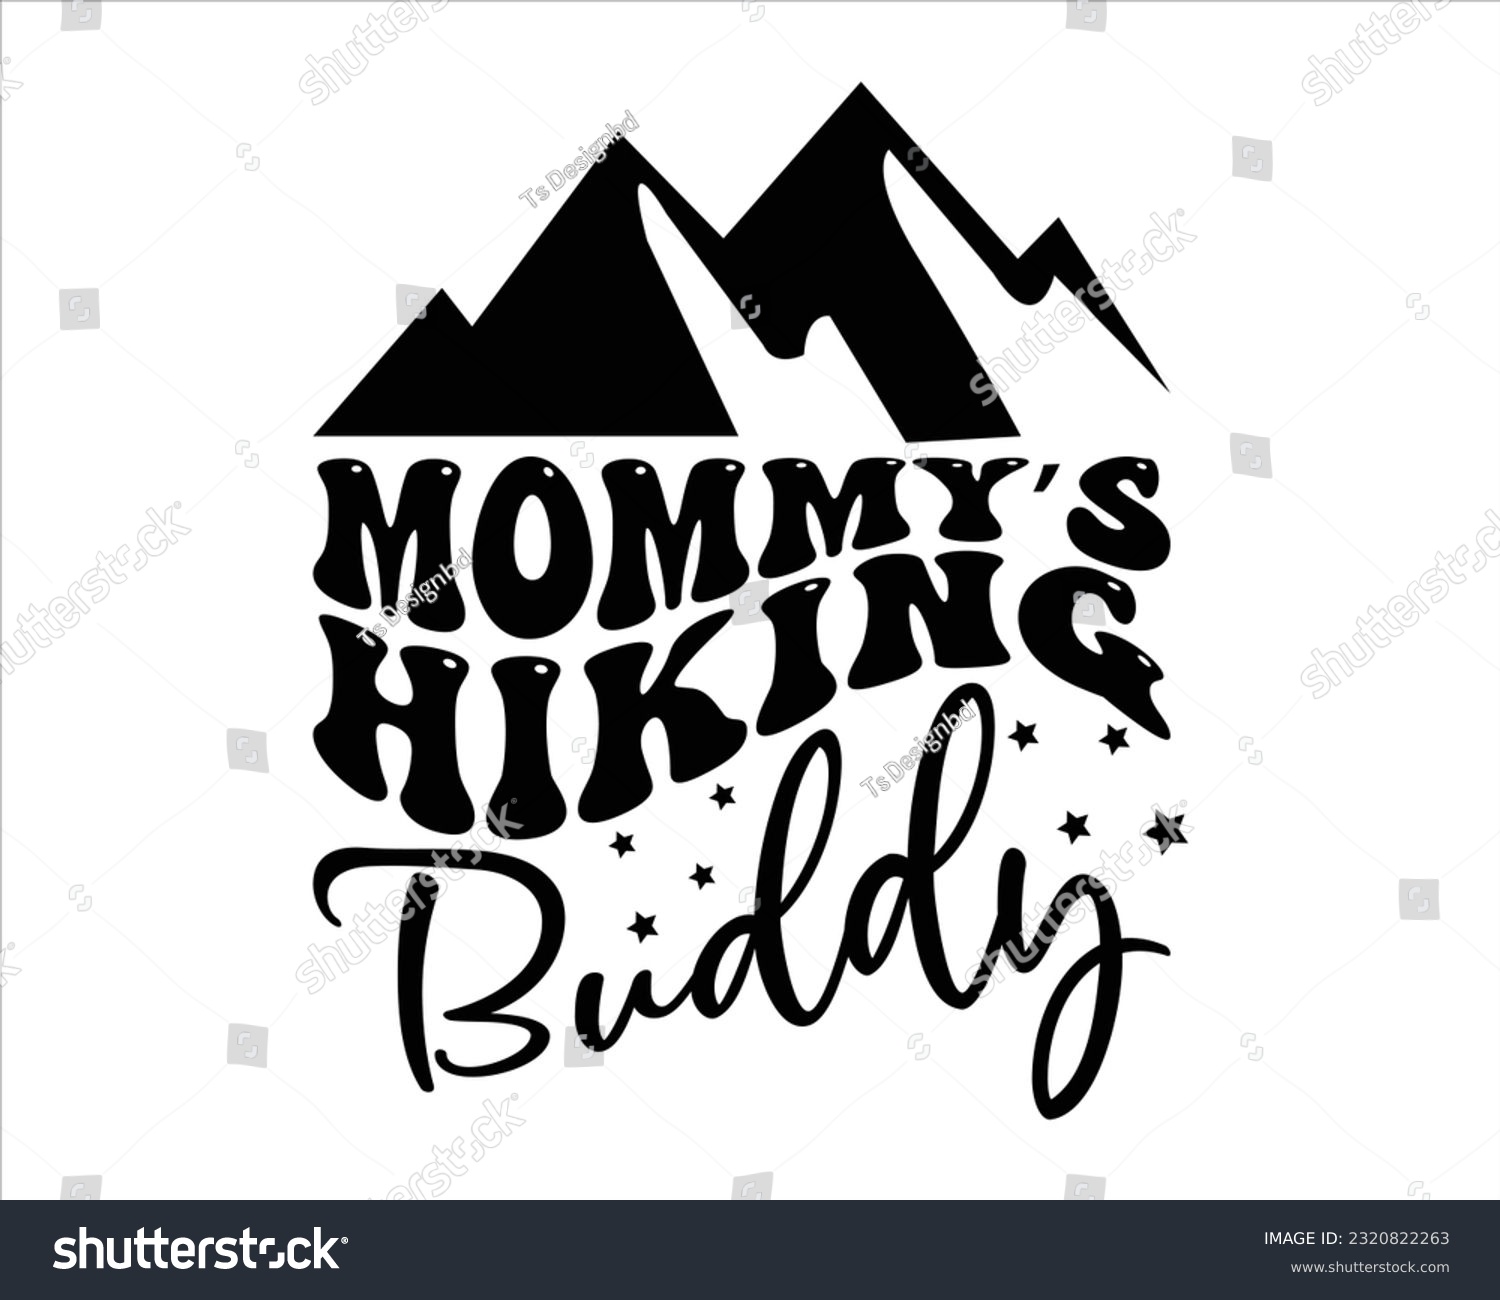 SVG of  Mommy's Hiking Buddy Retro Svg Design,Hiking Retro Svg Design, Mountain illustration, outdoor adventure ,Outdoor Adventure Inspiring Motivation Quote, camping, hiking,groovy design svg